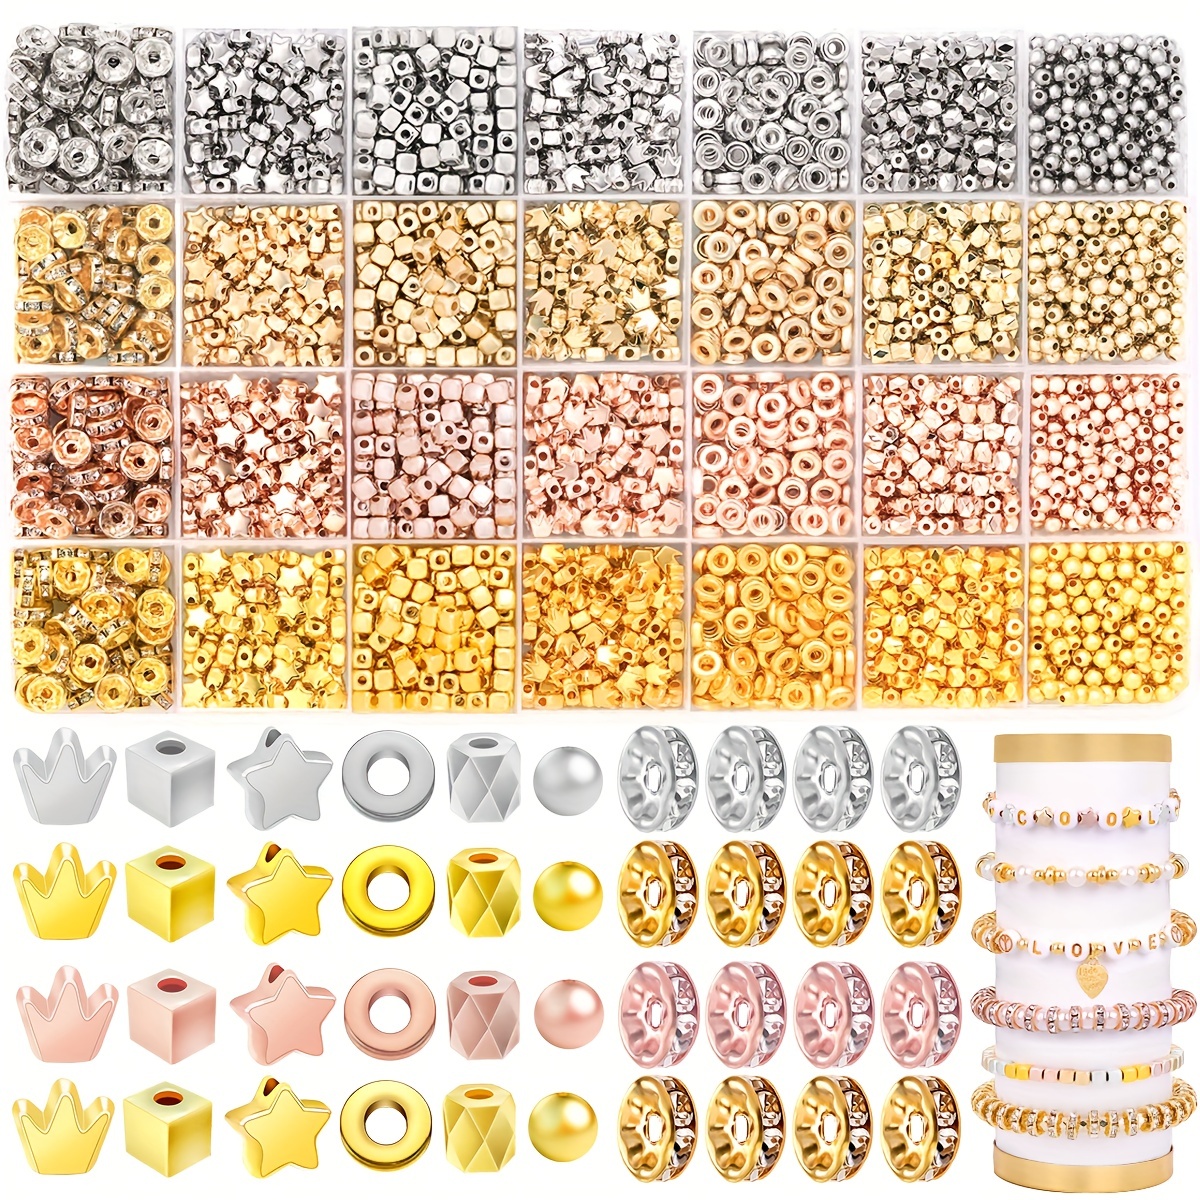 1 Set Gold Spacer Beads for Jewelry Making, Gold Round Beads and Gold Flat  Clay Beads for Bracelets Making, Small Gold Filled Beads for Jewelry Making